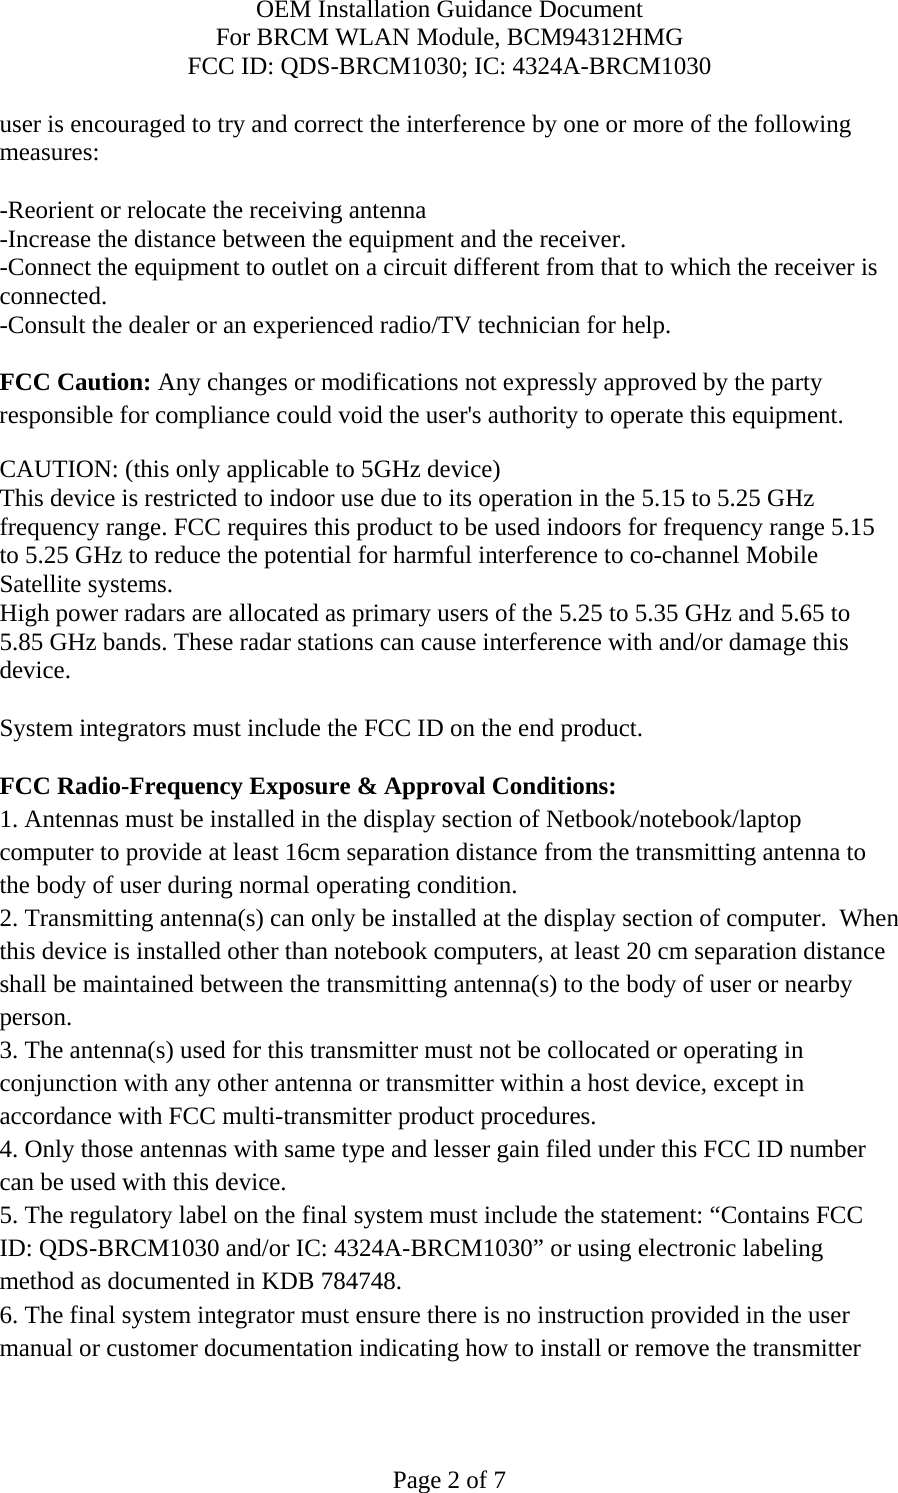 OEM Installation Guidance Document For BRCM WLAN Module, BCM94312HMG FCC ID: QDS-BRCM1030; IC: 4324A-BRCM1030  Page 2 of 7 user is encouraged to try and correct the interference by one or more of the following measures:   -Reorient or relocate the receiving antenna -Increase the distance between the equipment and the receiver. -Connect the equipment to outlet on a circuit different from that to which the receiver is connected. -Consult the dealer or an experienced radio/TV technician for help.  FCC Caution: Any changes or modifications not expressly approved by the party responsible for compliance could void the user&apos;s authority to operate this equipment. CAUTION: (this only applicable to 5GHz device) This device is restricted to indoor use due to its operation in the 5.15 to 5.25 GHz frequency range. FCC requires this product to be used indoors for frequency range 5.15 to 5.25 GHz to reduce the potential for harmful interference to co-channel Mobile Satellite systems. High power radars are allocated as primary users of the 5.25 to 5.35 GHz and 5.65 to 5.85 GHz bands. These radar stations can cause interference with and/or damage this device.  System integrators must include the FCC ID on the end product.   FCC Radio-Frequency Exposure &amp; Approval Conditions: 1. Antennas must be installed in the display section of Netbook/notebook/laptop computer to provide at least 16cm separation distance from the transmitting antenna to the body of user during normal operating condition. 2. Transmitting antenna(s) can only be installed at the display section of computer.  When this device is installed other than notebook computers, at least 20 cm separation distance shall be maintained between the transmitting antenna(s) to the body of user or nearby person. 3. The antenna(s) used for this transmitter must not be collocated or operating in conjunction with any other antenna or transmitter within a host device, except in accordance with FCC multi-transmitter product procedures. 4. Only those antennas with same type and lesser gain filed under this FCC ID number can be used with this device. 5. The regulatory label on the final system must include the statement: “Contains FCC ID: QDS-BRCM1030 and/or IC: 4324A-BRCM1030” or using electronic labeling method as documented in KDB 784748. 6. The final system integrator must ensure there is no instruction provided in the user manual or customer documentation indicating how to install or remove the transmitter 